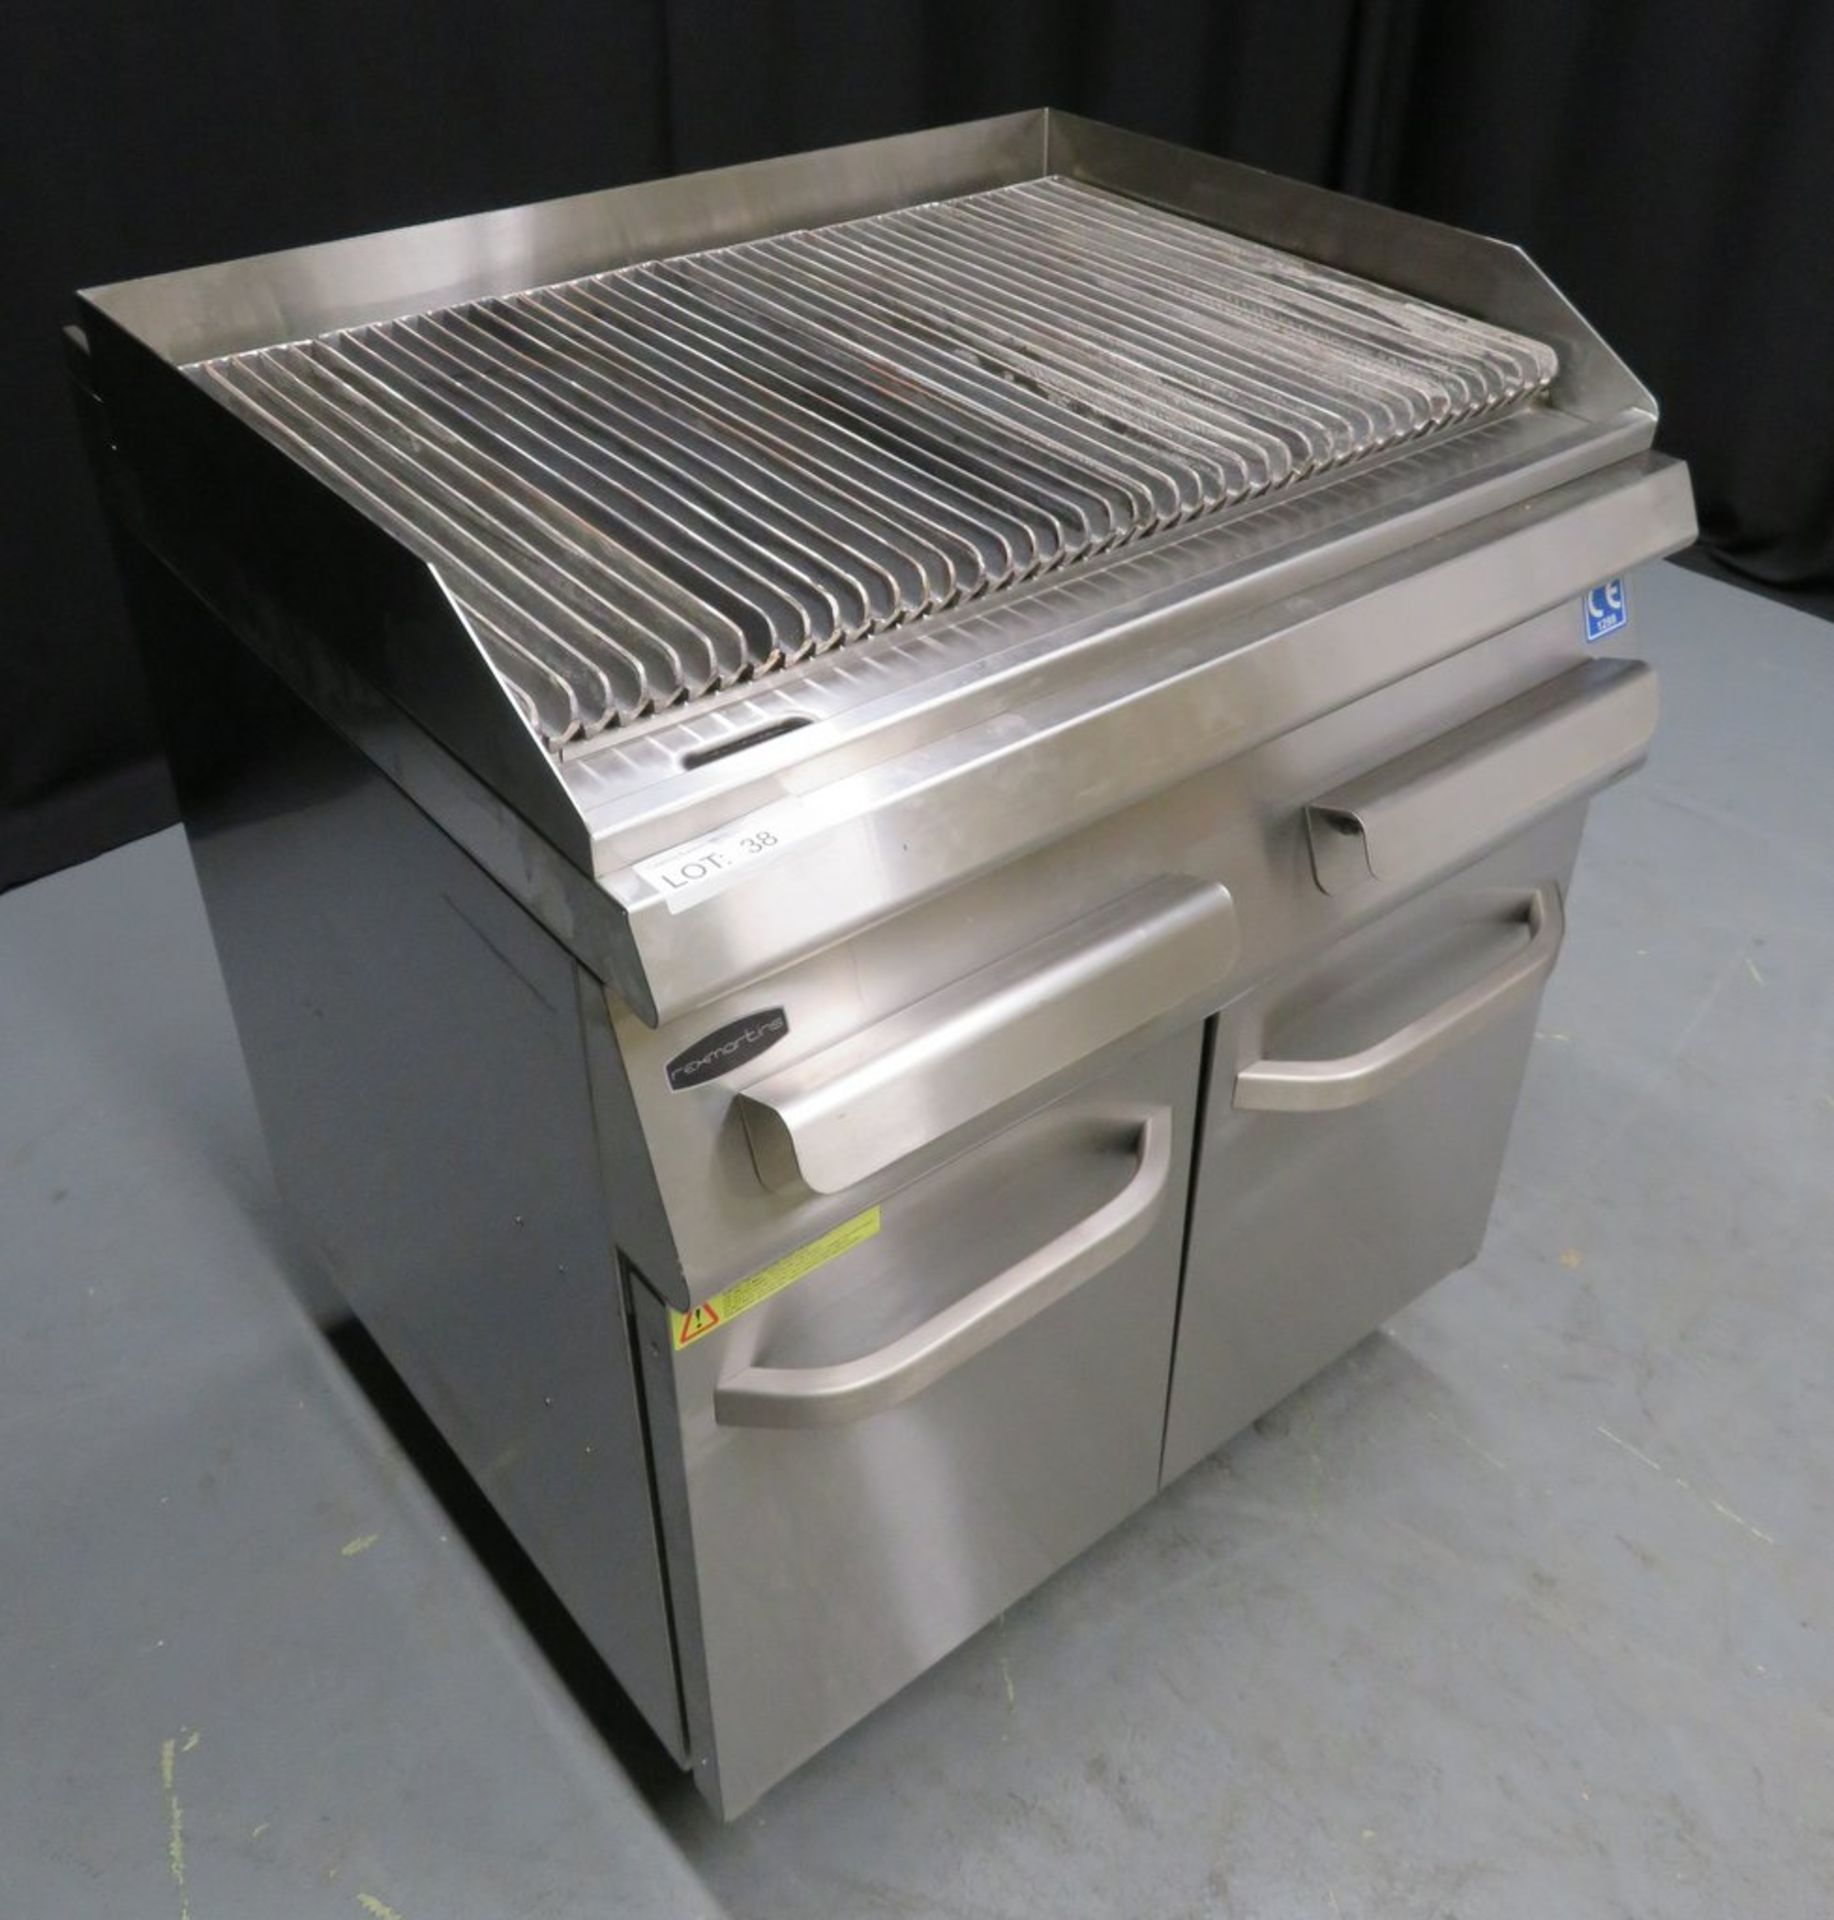 Heavy duty radiant chargrill with humidity feature, model G7V200G, gas, brand new no box